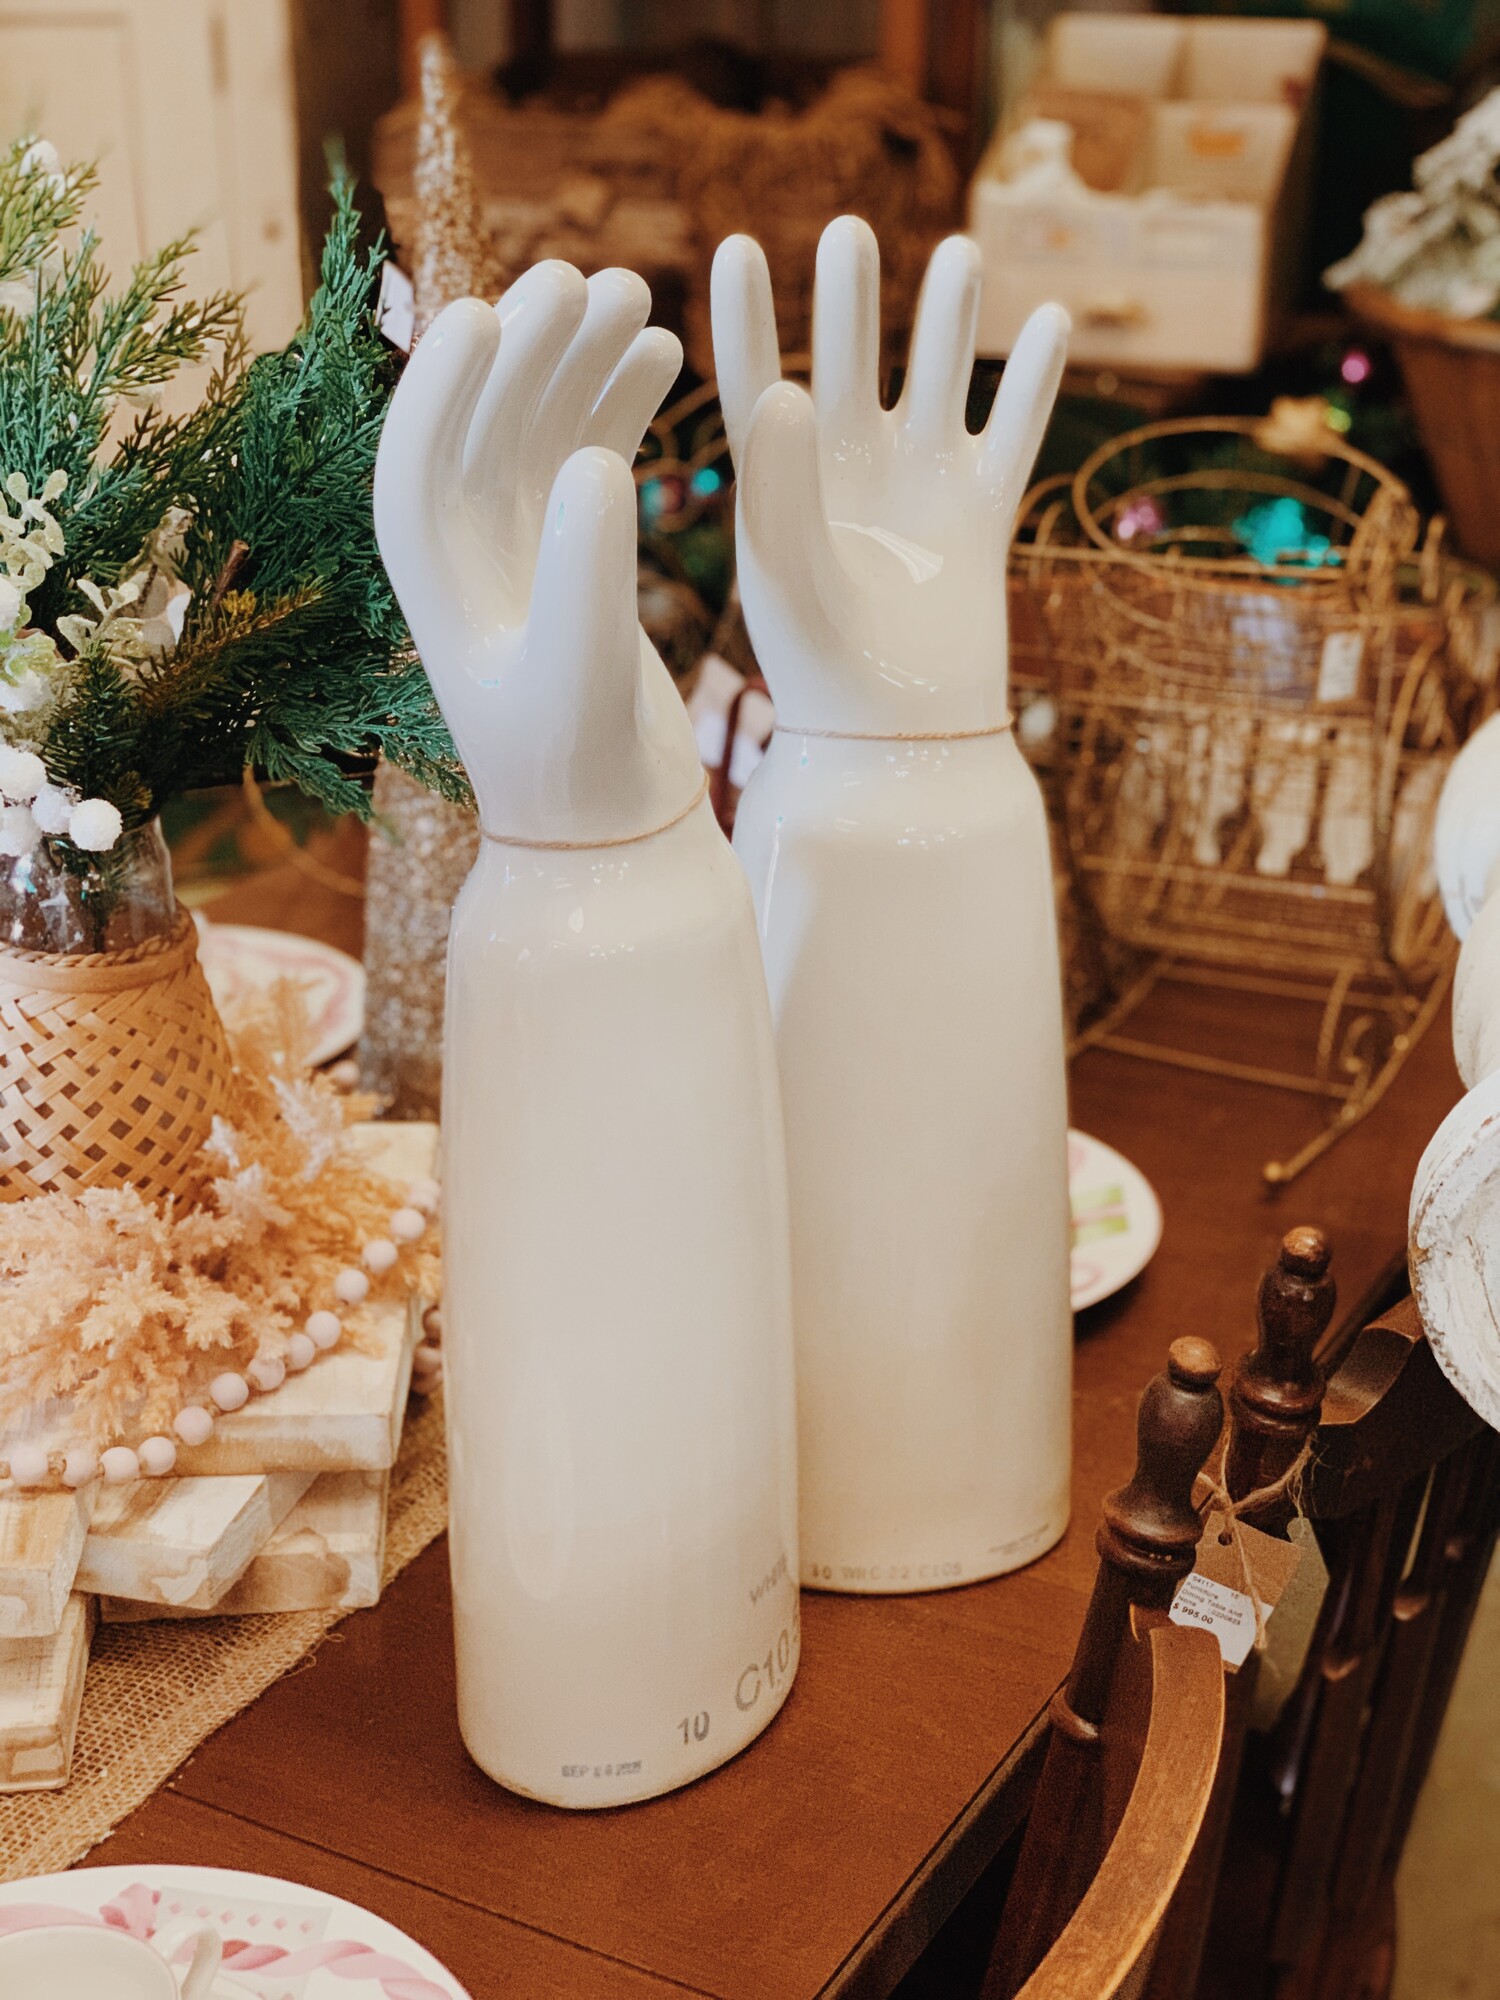 These vintage oversized white porcelain hand glove molds are the absolute coolest! These are great decor on a shelf or table in threes or fives paired with our smaller glove molds (19145). No two hands are exactly alike, but they measure roughly 22.5 inches tall by 7 inches wide.